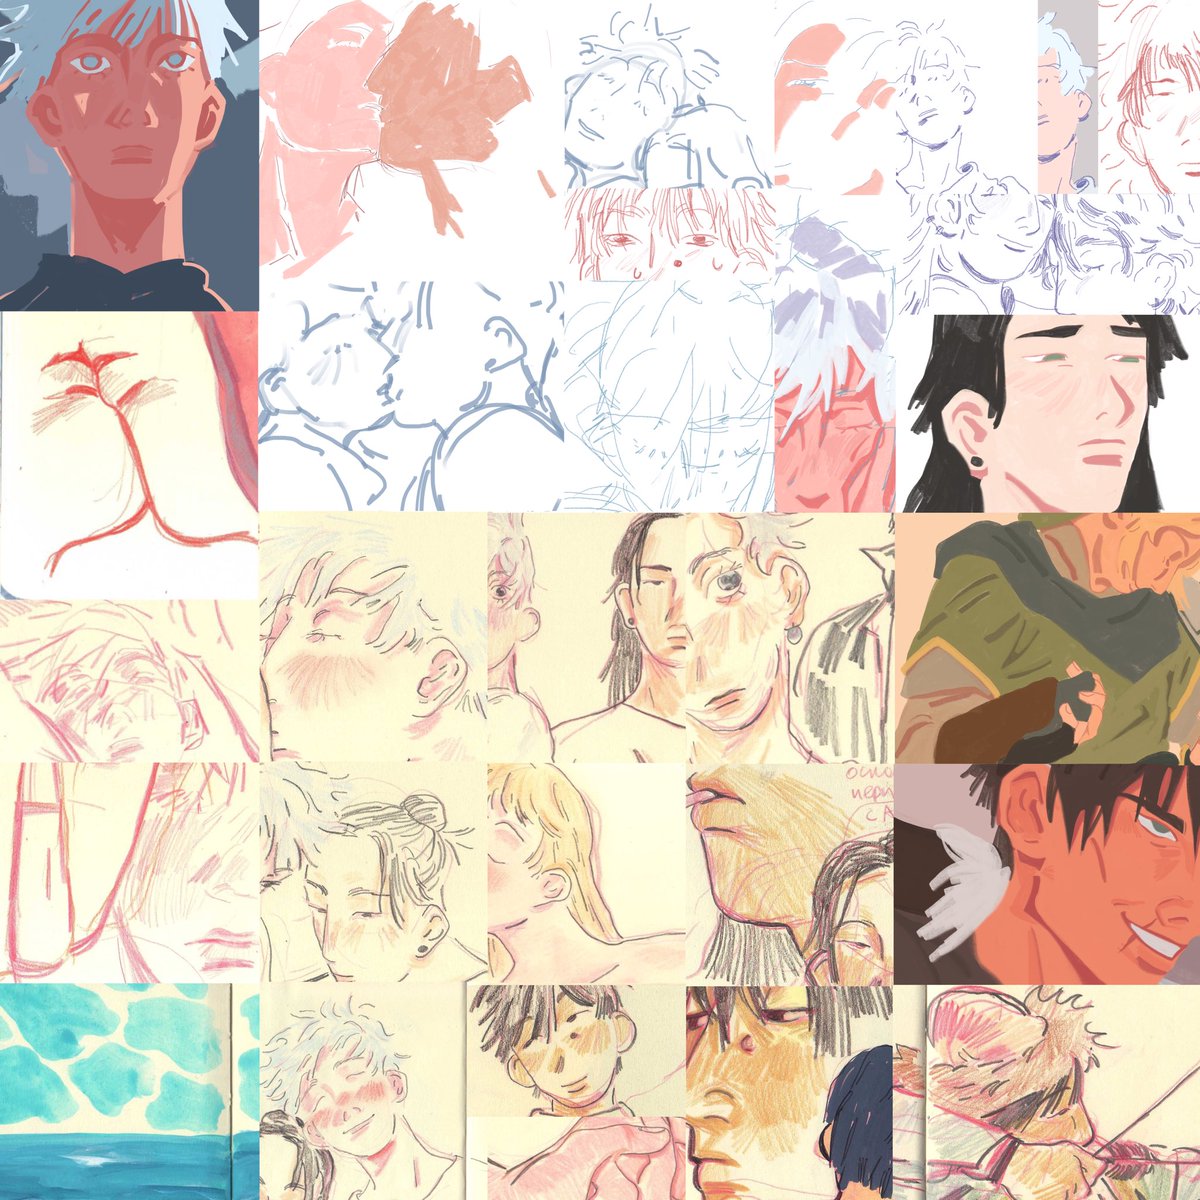 preview for new posts that are already up on my patreon page✌️✌️ 

reminder that a post sketchbook scans with an early access, wips and more exclusive content here 